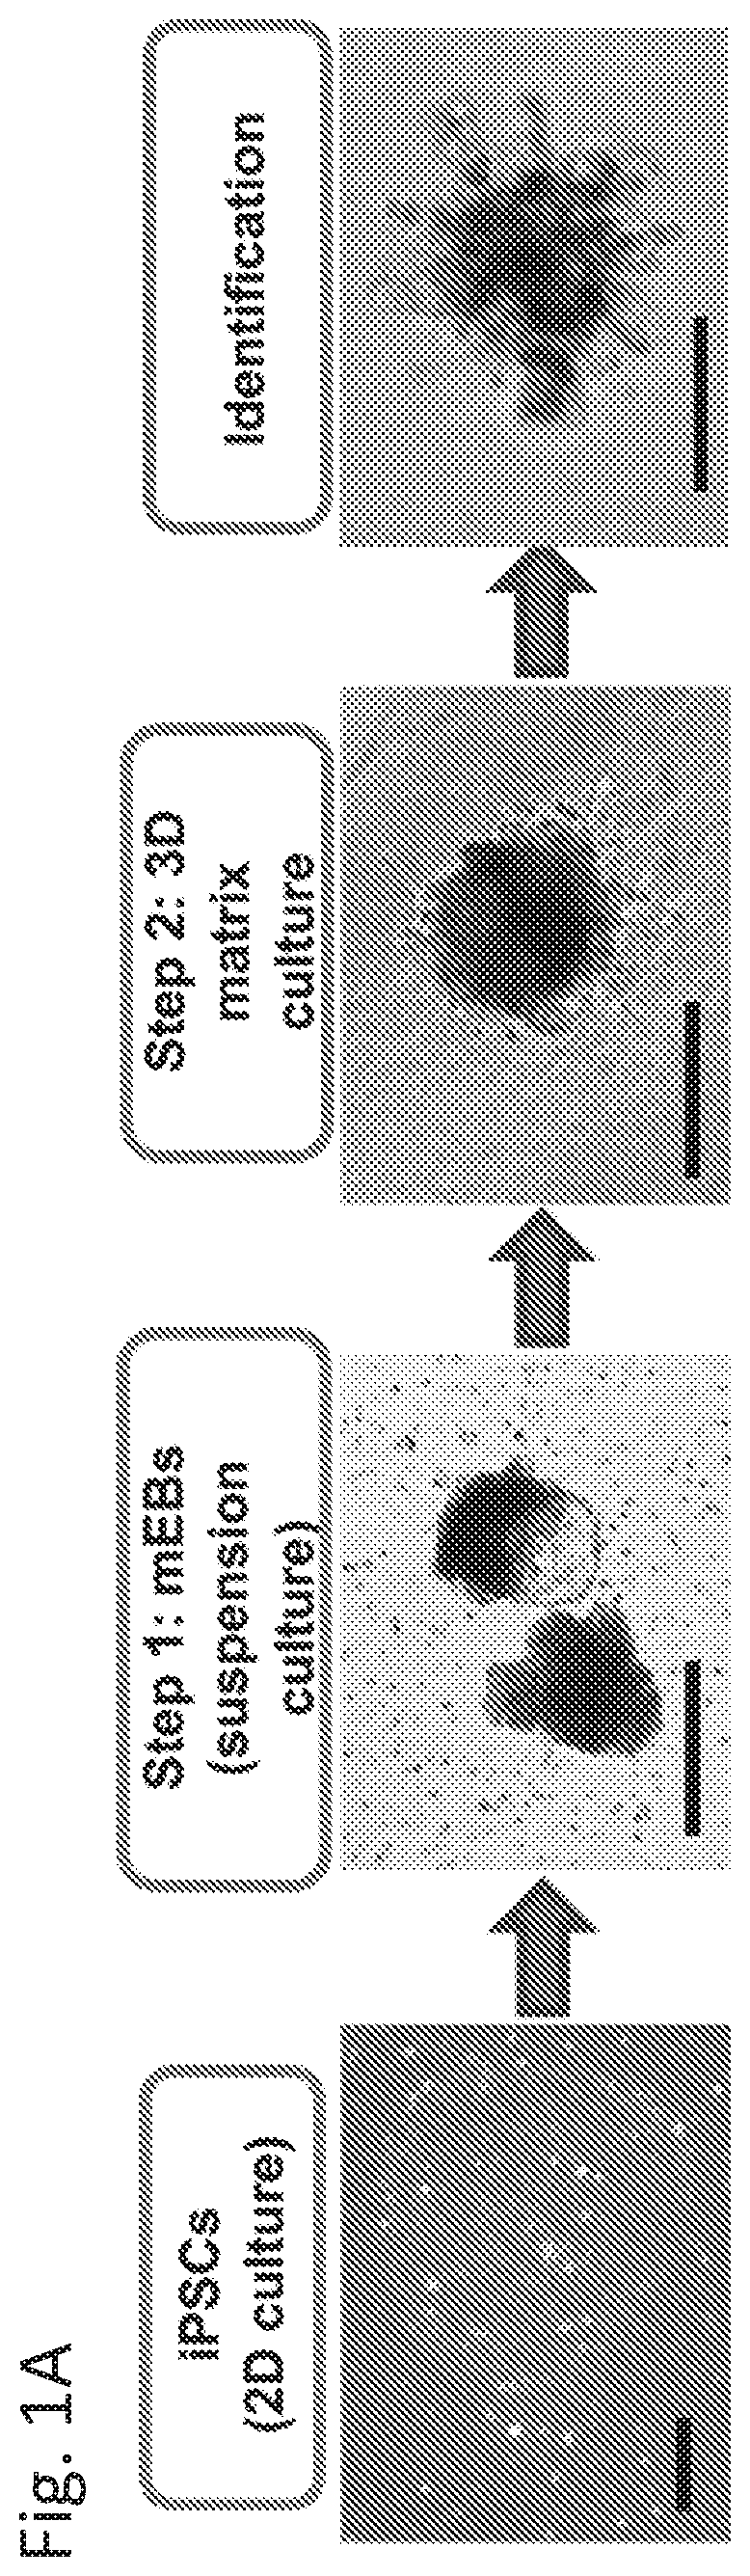 In vitro induction of mammary-like differentiation from human pluripotent stem cells